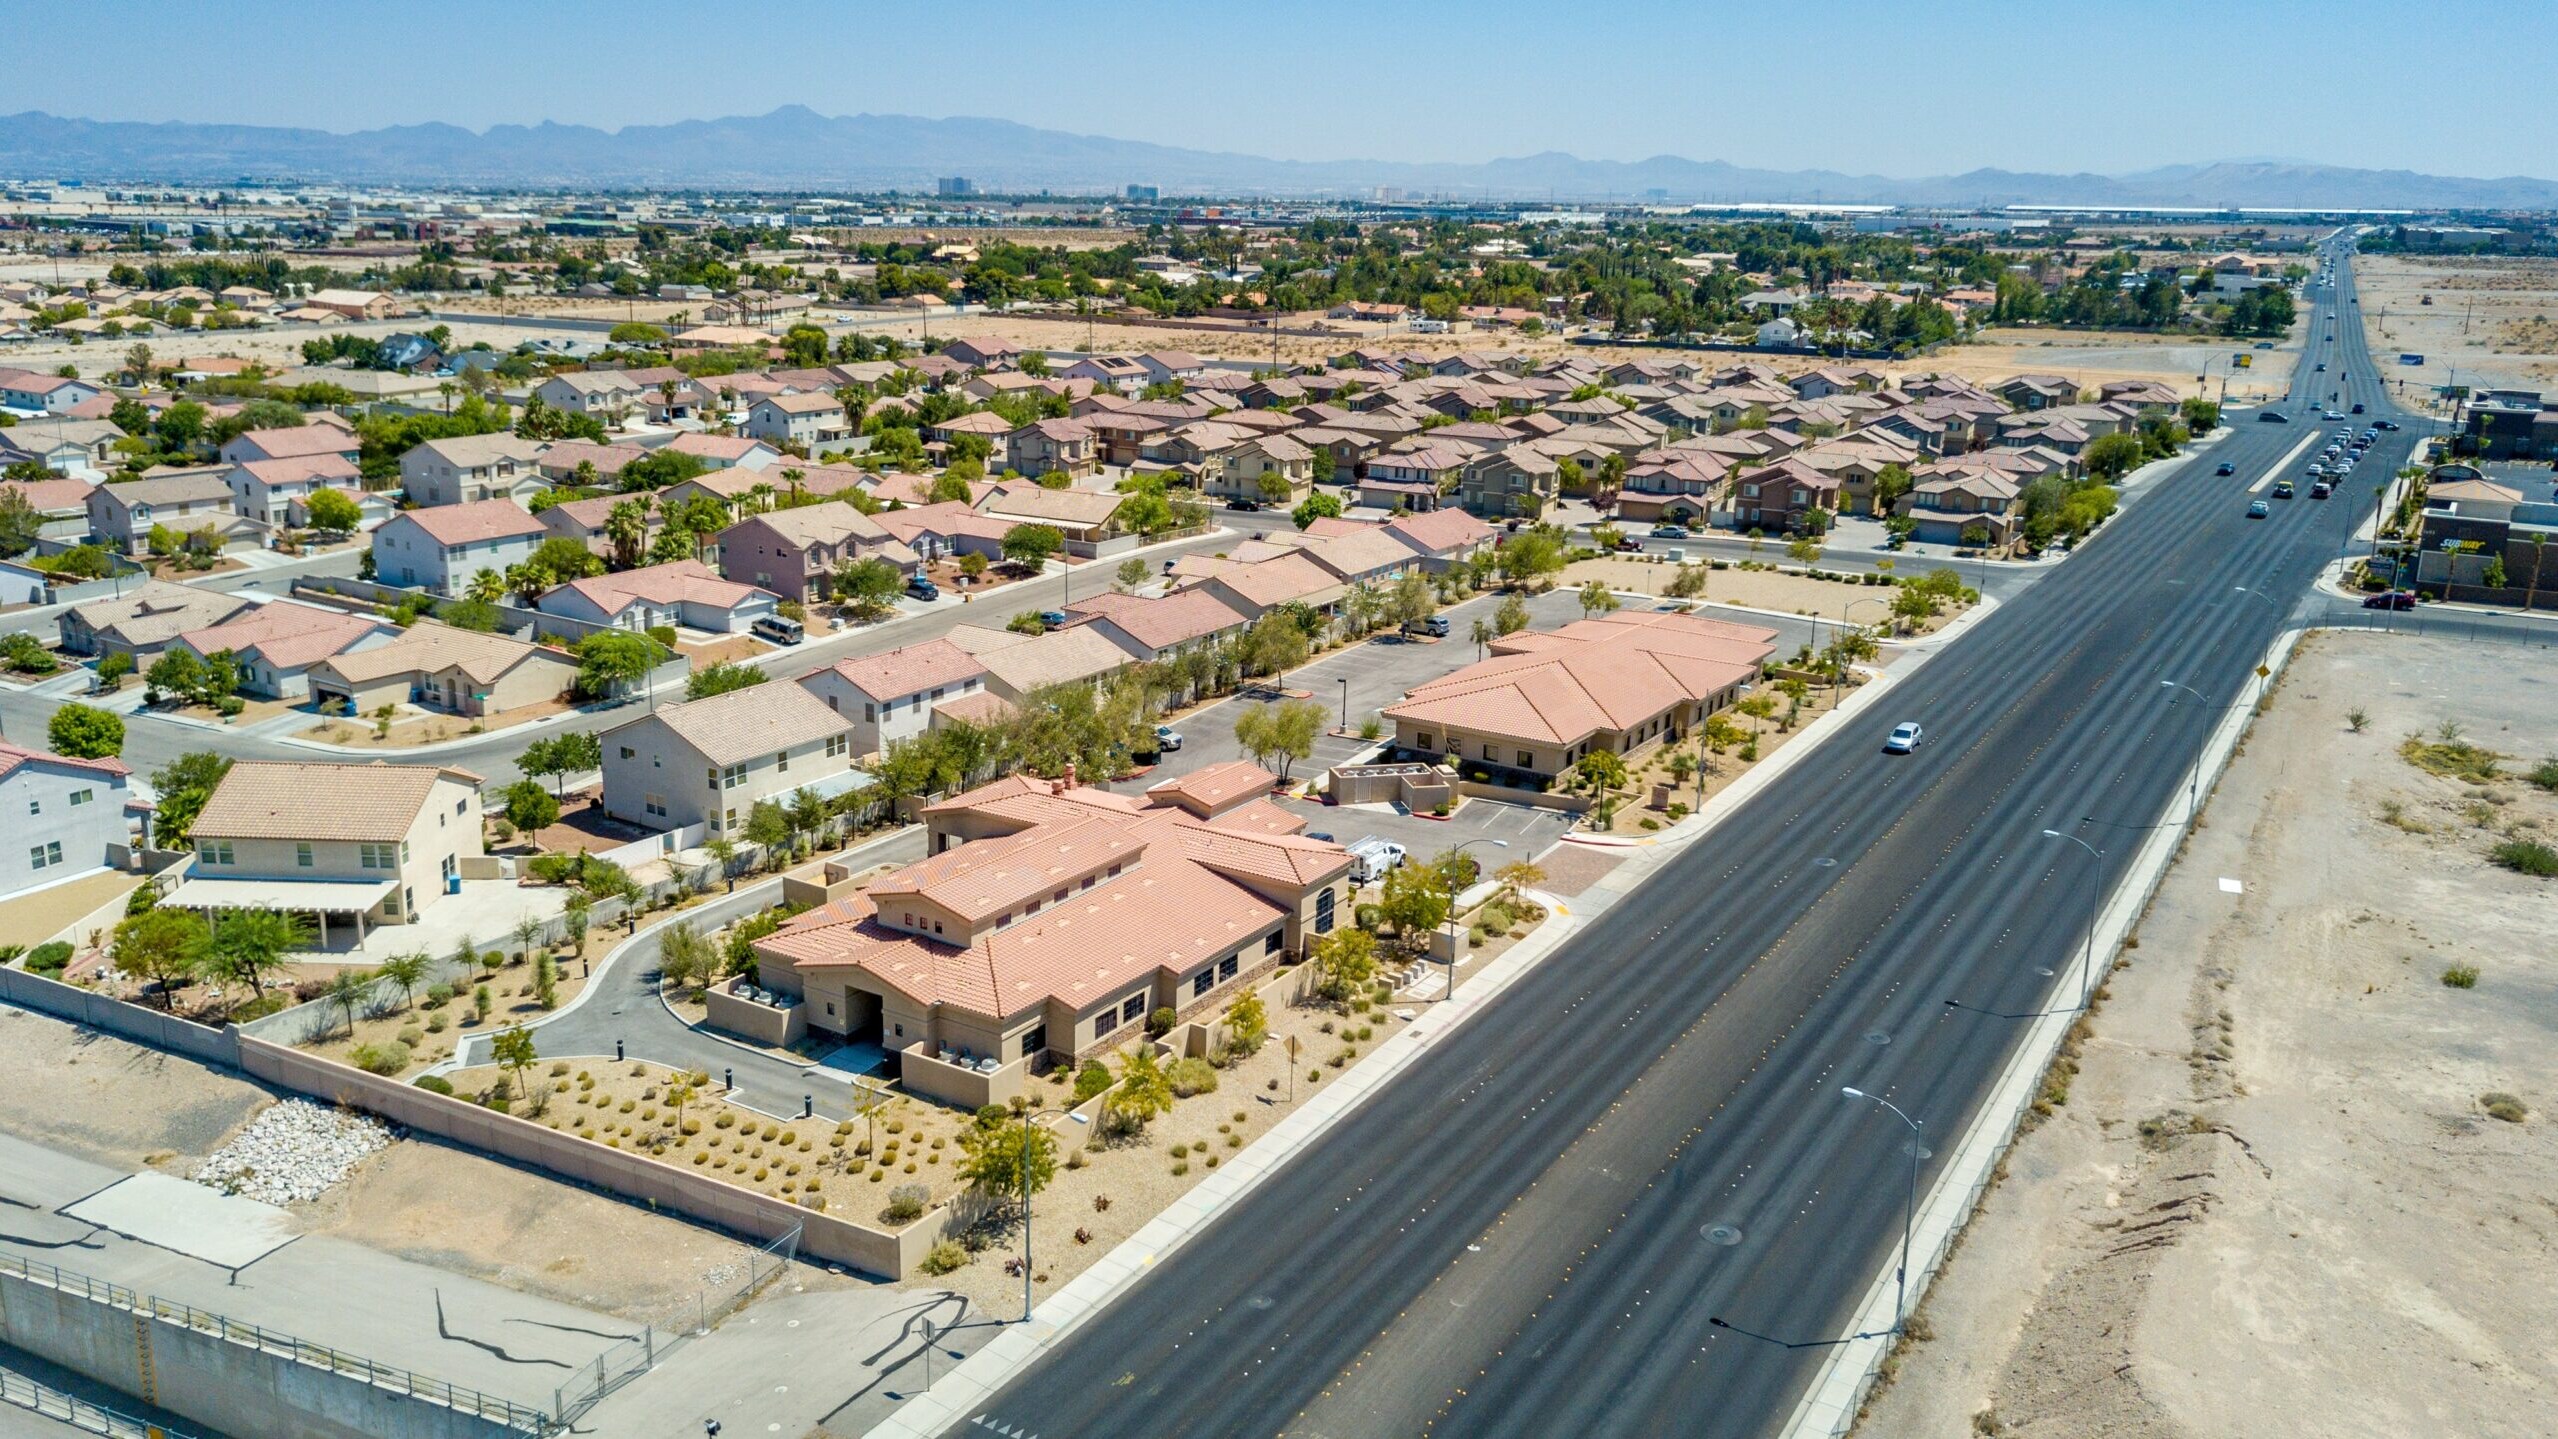 Drone shot of a commercial real estate building off of Jones Blvd in Las Vegas